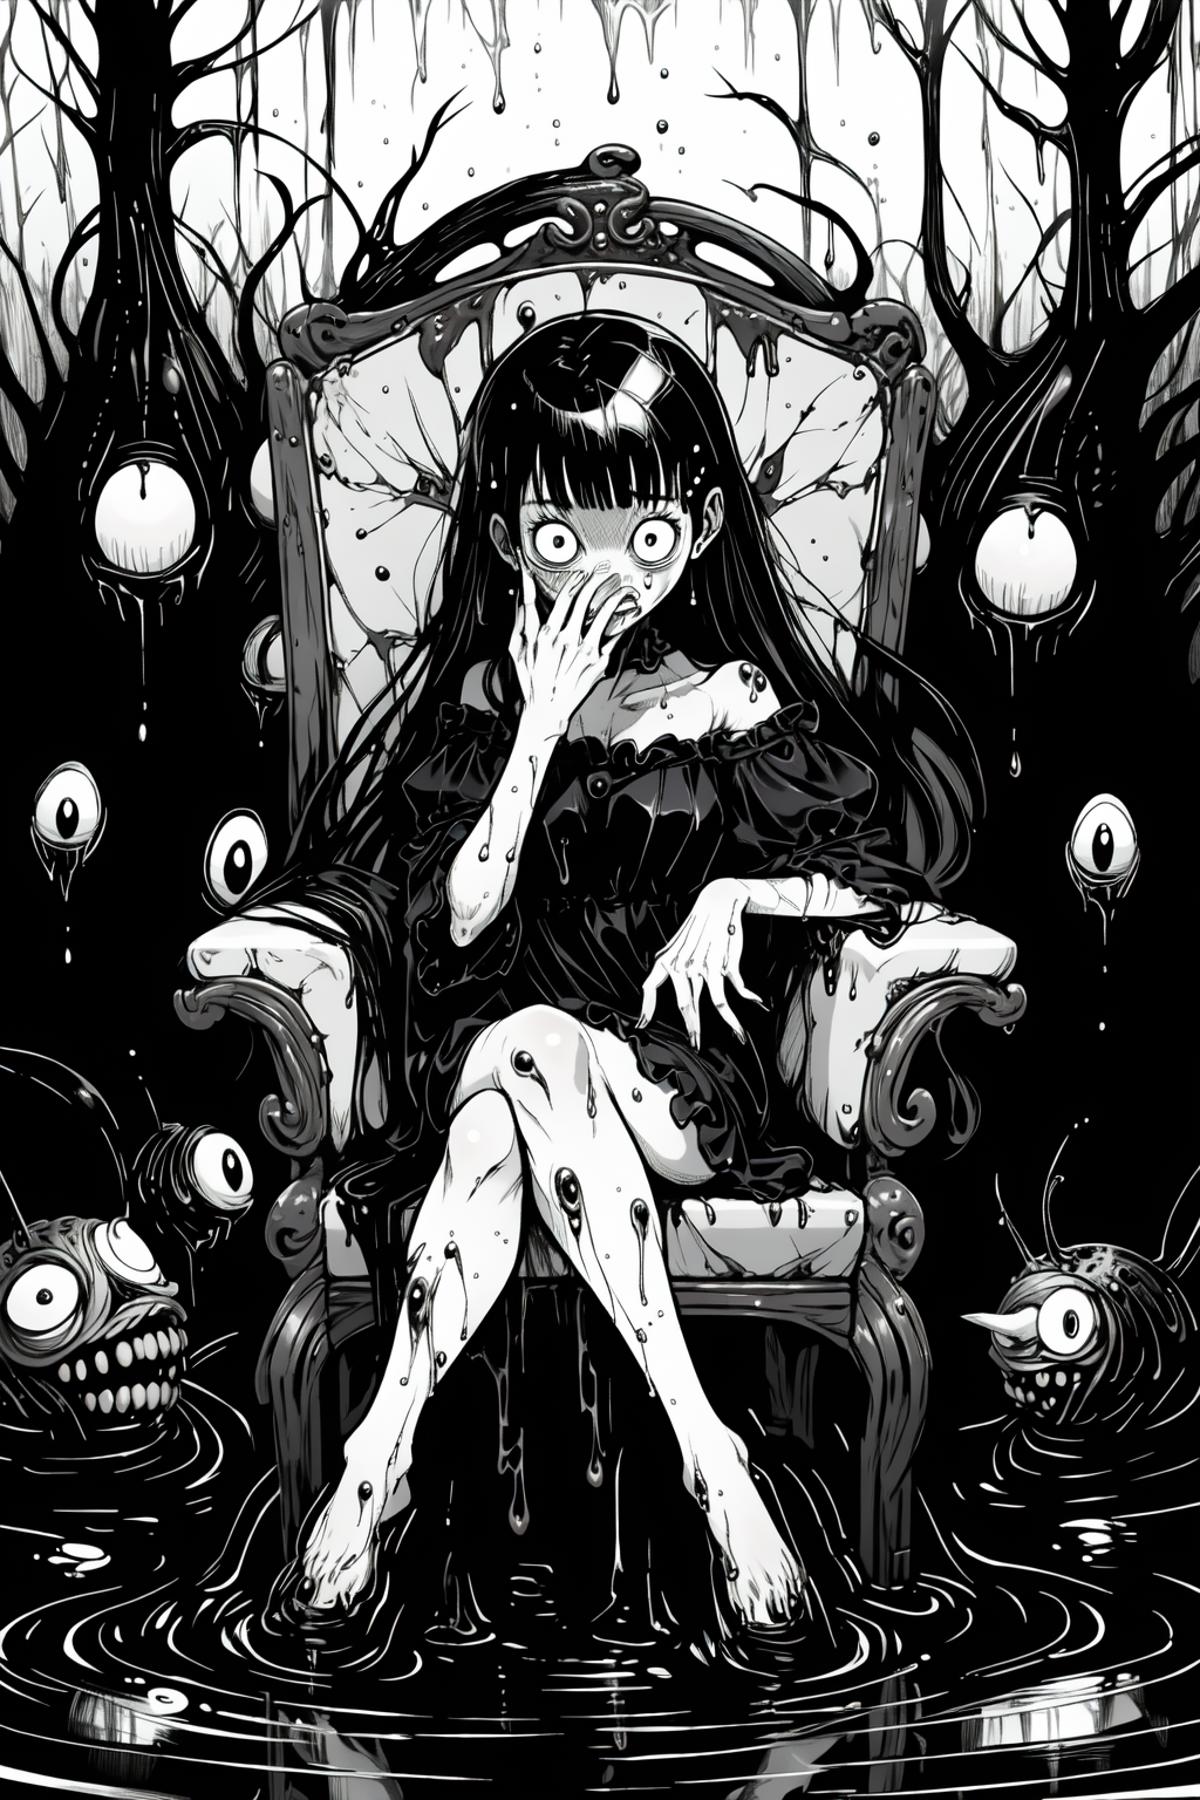 Junji Ito Style {SDXL Now Supported} image by Mayheim